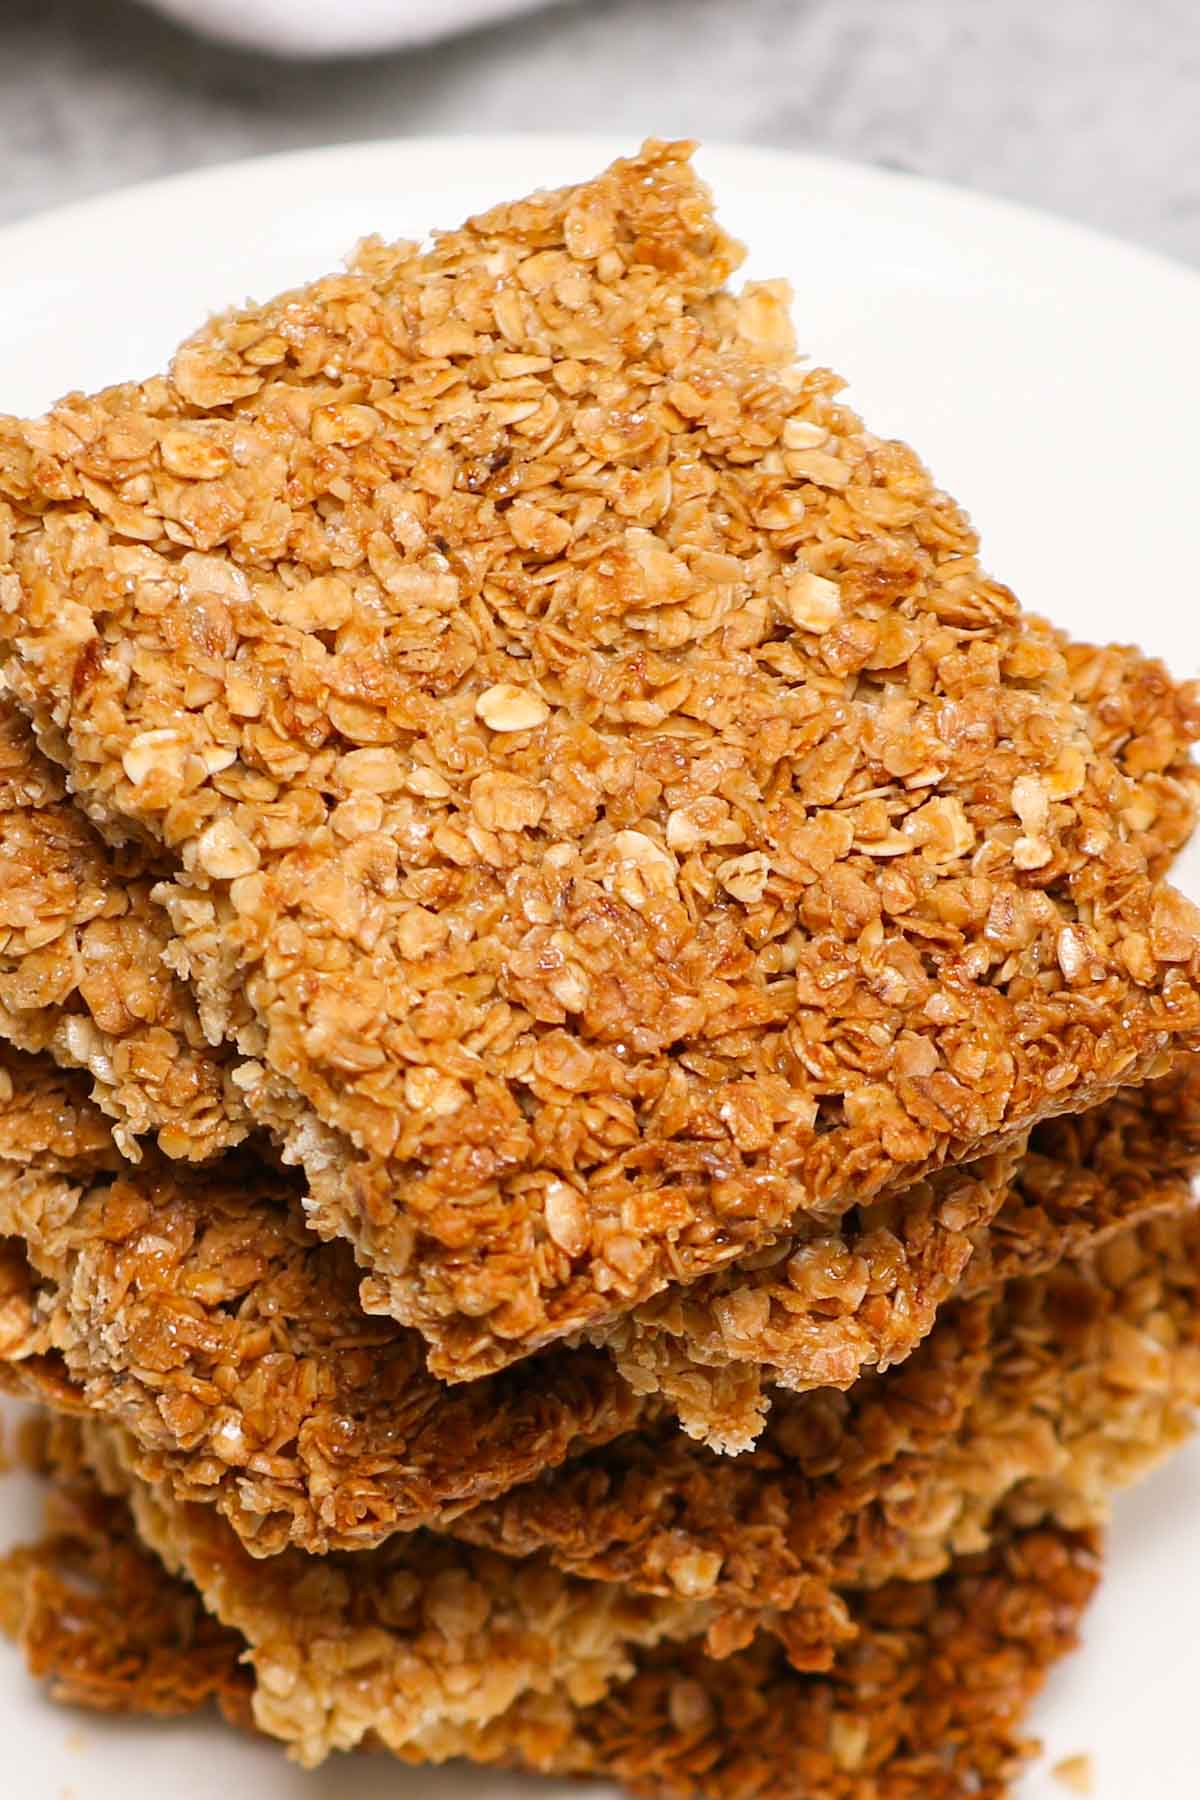 Closeup of freshly made British flapjacks on a serving plate